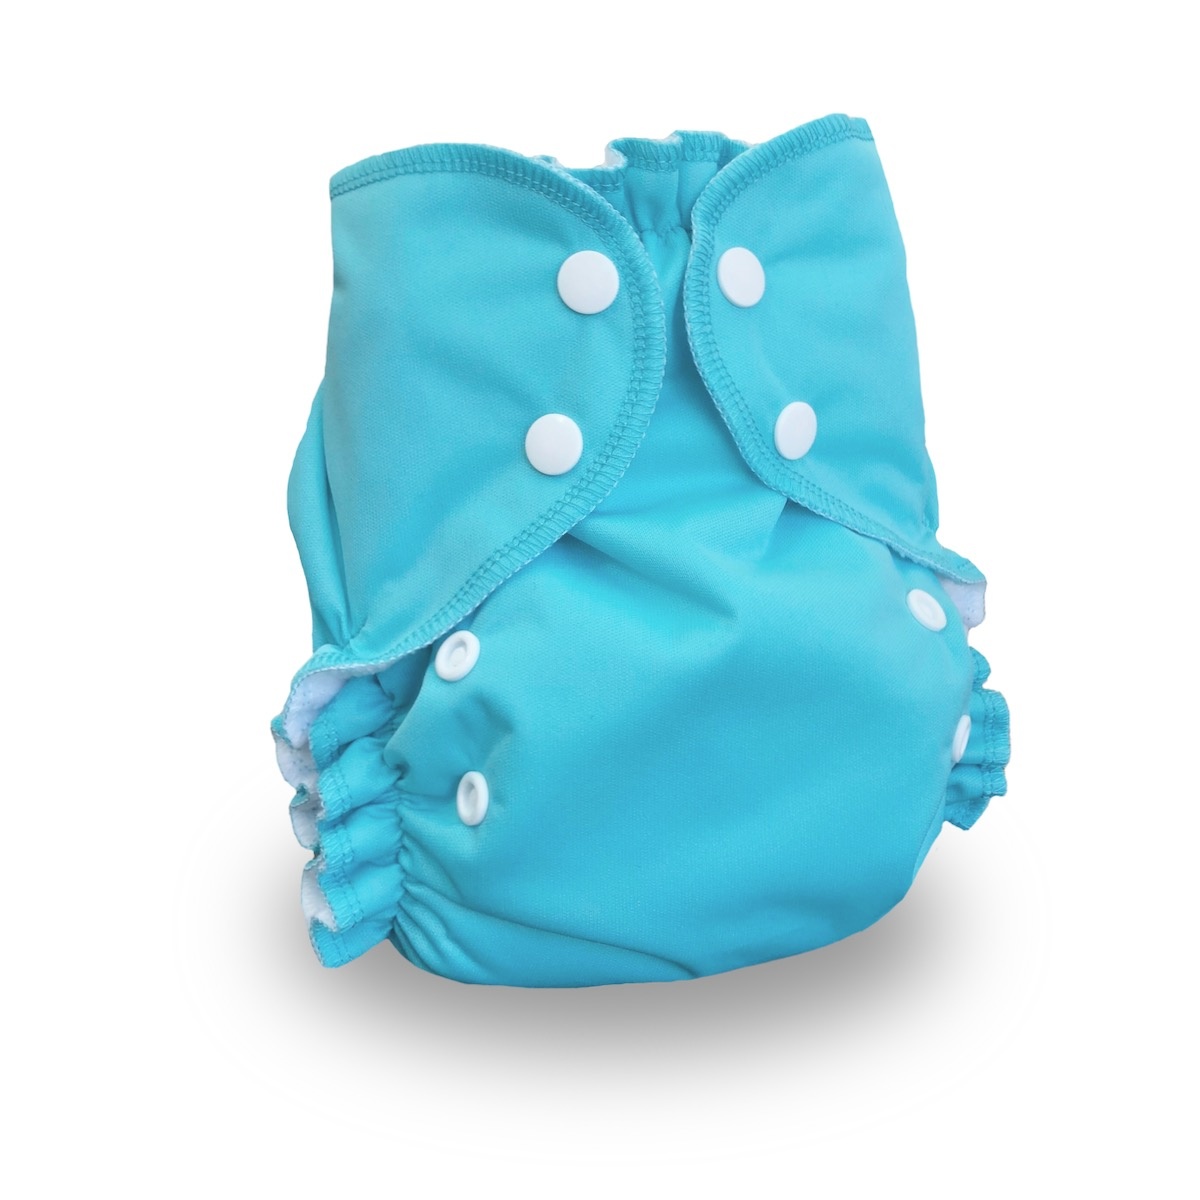 AMP Diapers AMP one-size duo diapers (solid colors)